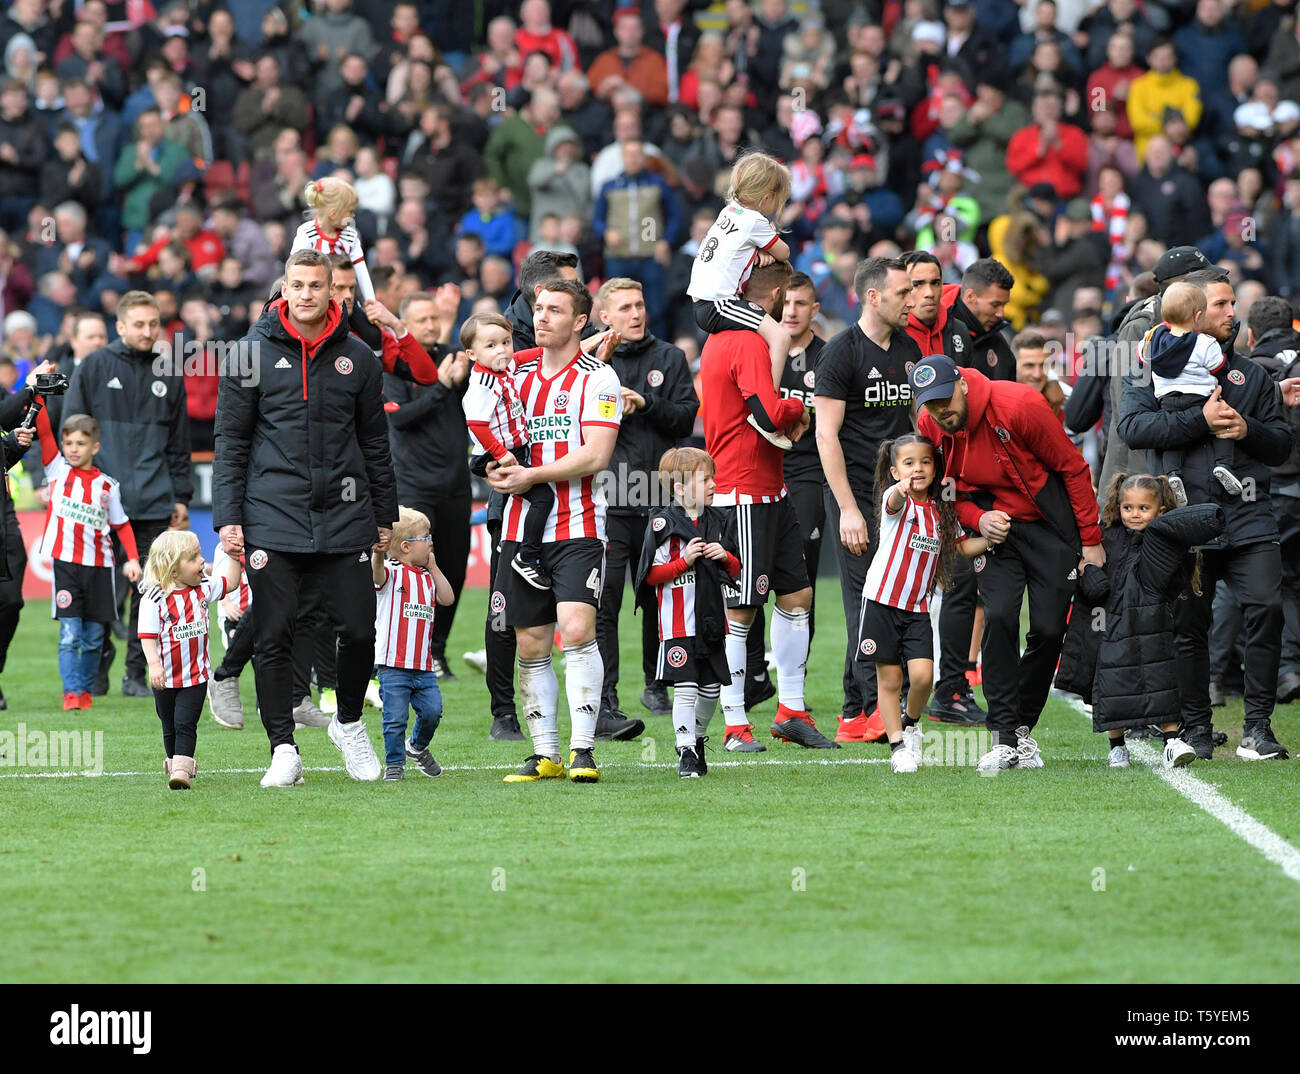 Sheffield, England 27th April. Sheffield United celebrate their win and promotion to the premiership at the end of their FA Championship football match between Sheffield United FC and Ipswich Town FC at the Sheffield United Football ground, Bramall Lane, on April 27th Sheffield, England. Stock Photo